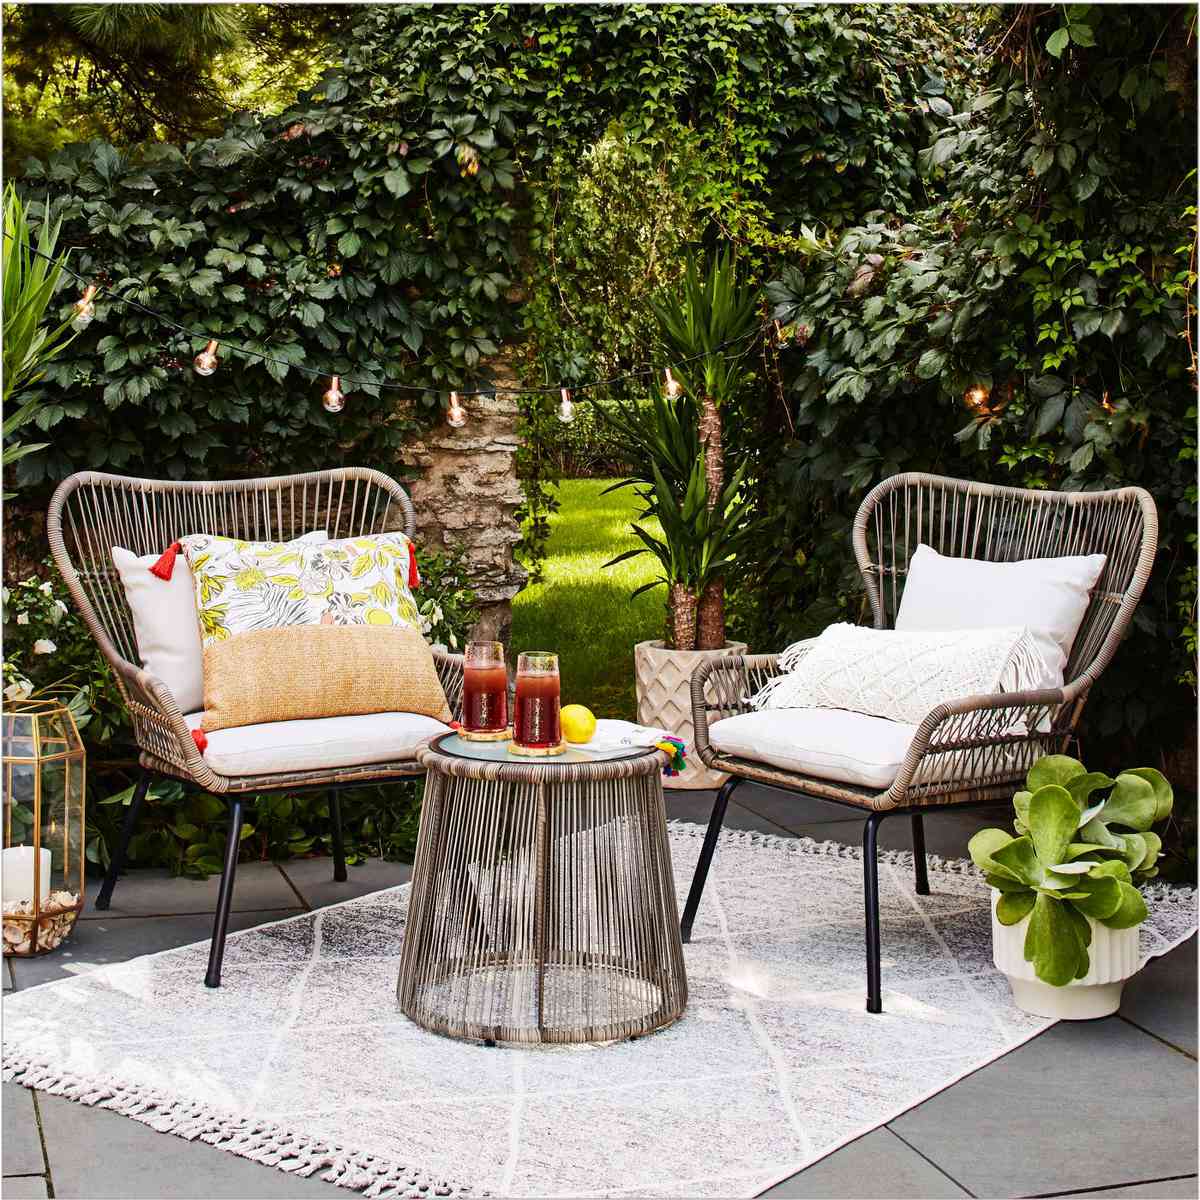 Best Outdoor Furniture For Small Spaces, Small Scale Outdoor Chairs